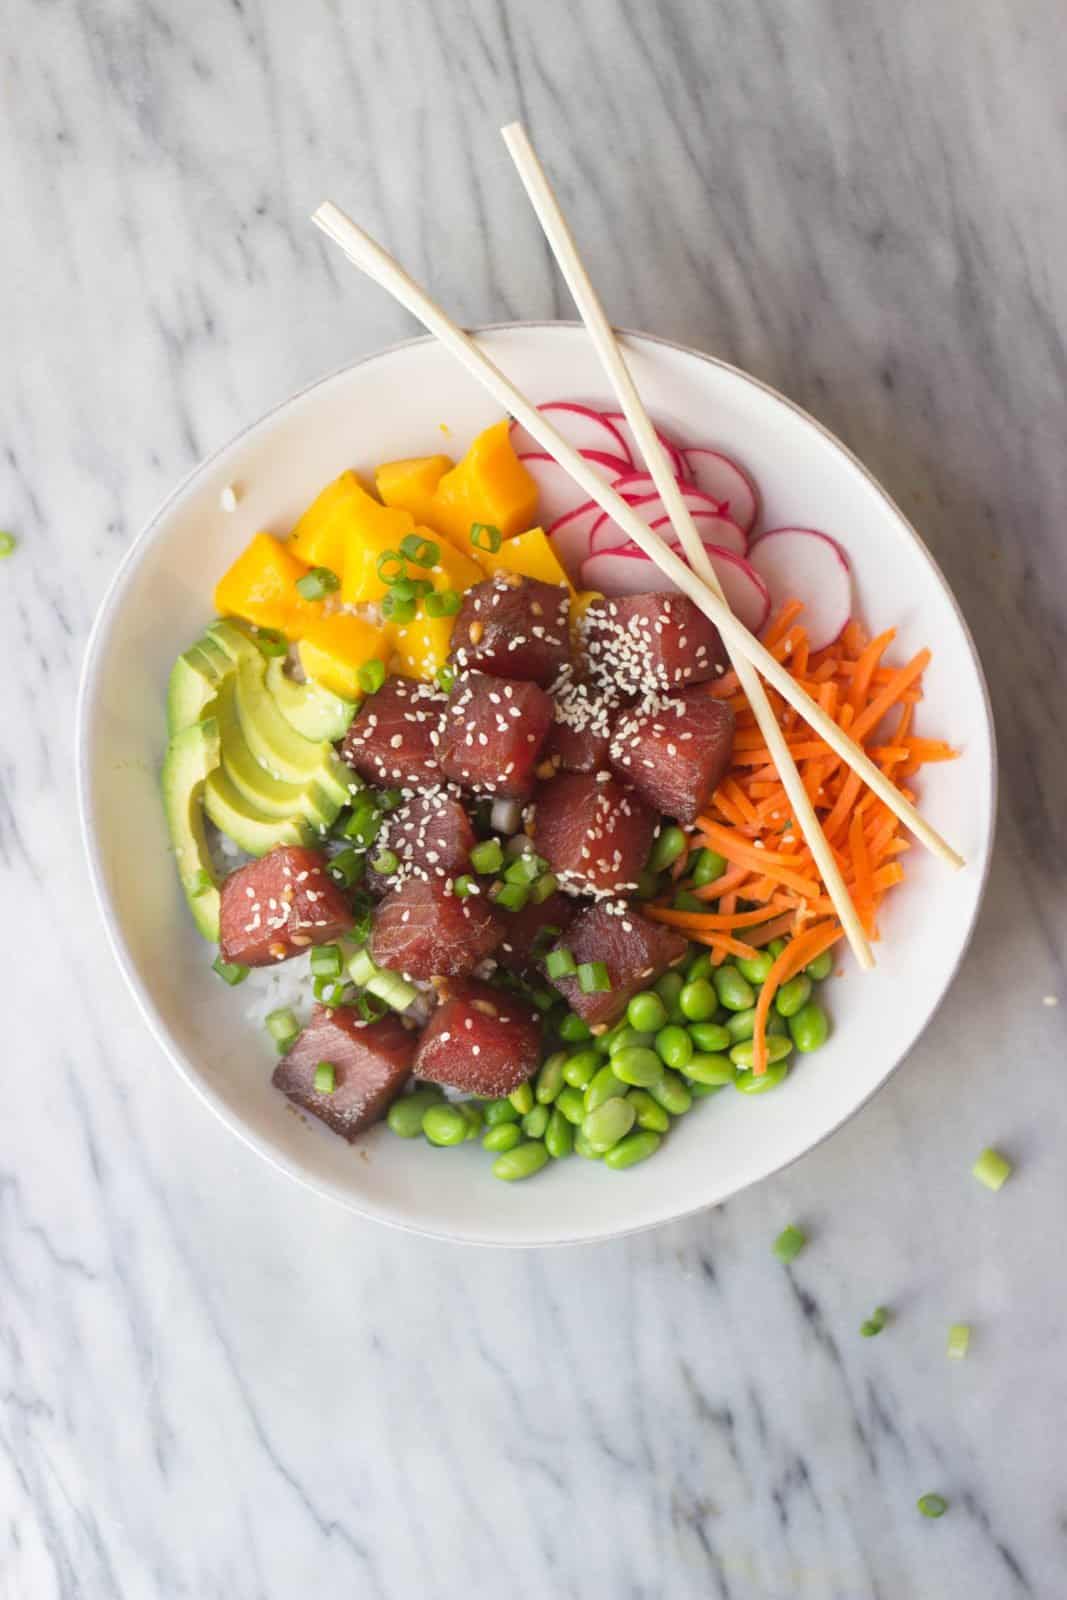 Ahi Tuna Bowls as an example of an easy way to eat more fish. 